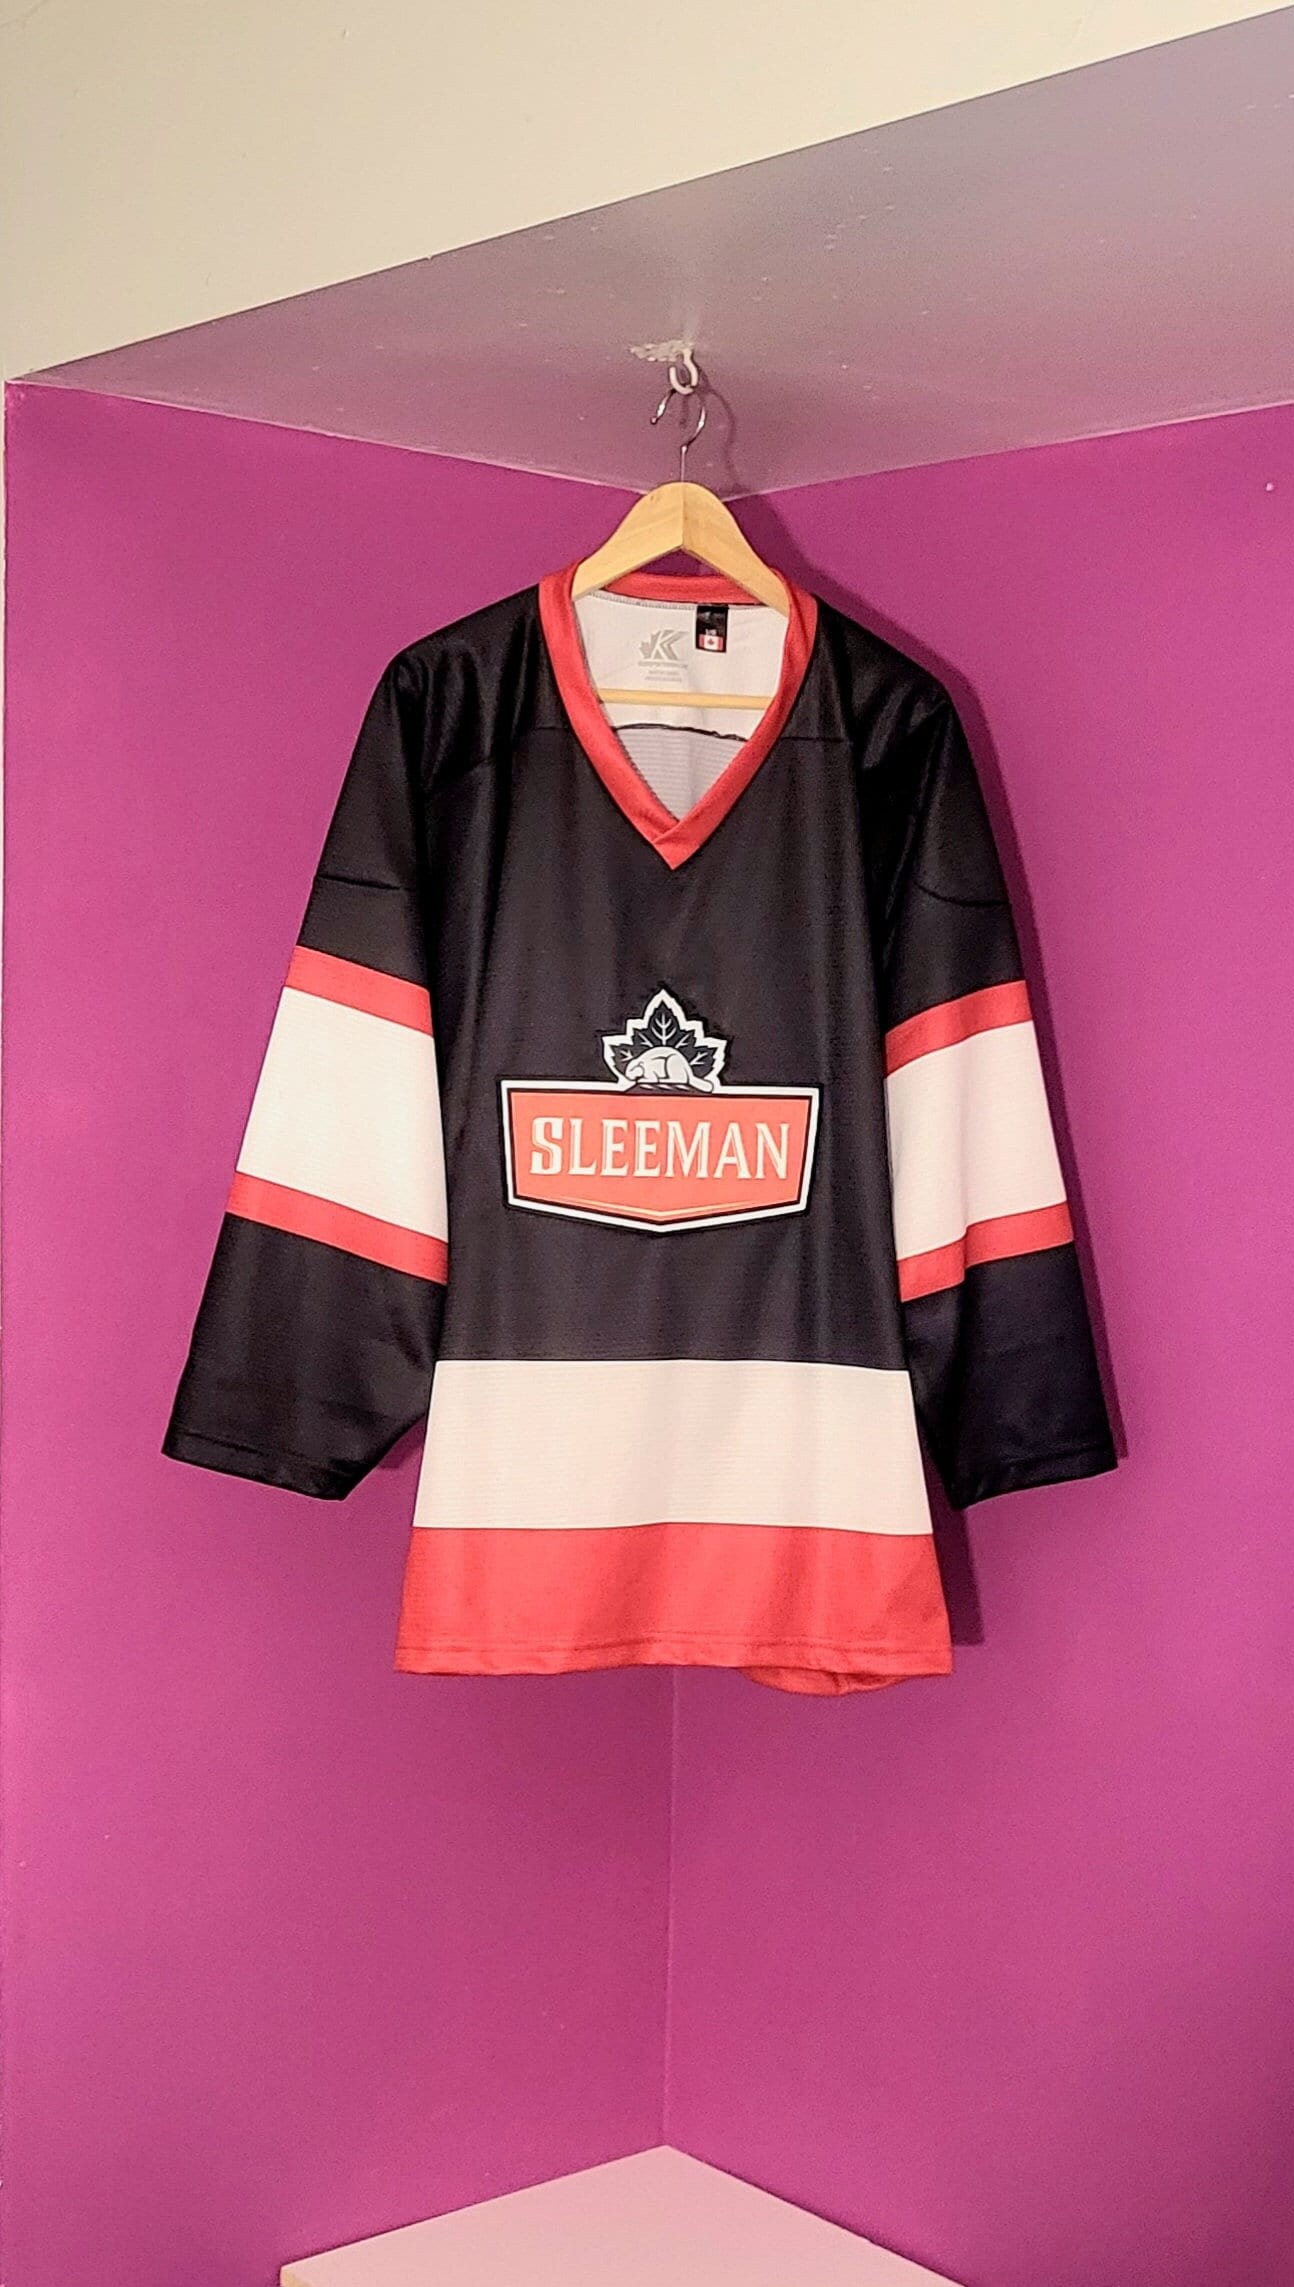 Bad Ass Beer League Jerseys: The Fourth Meal